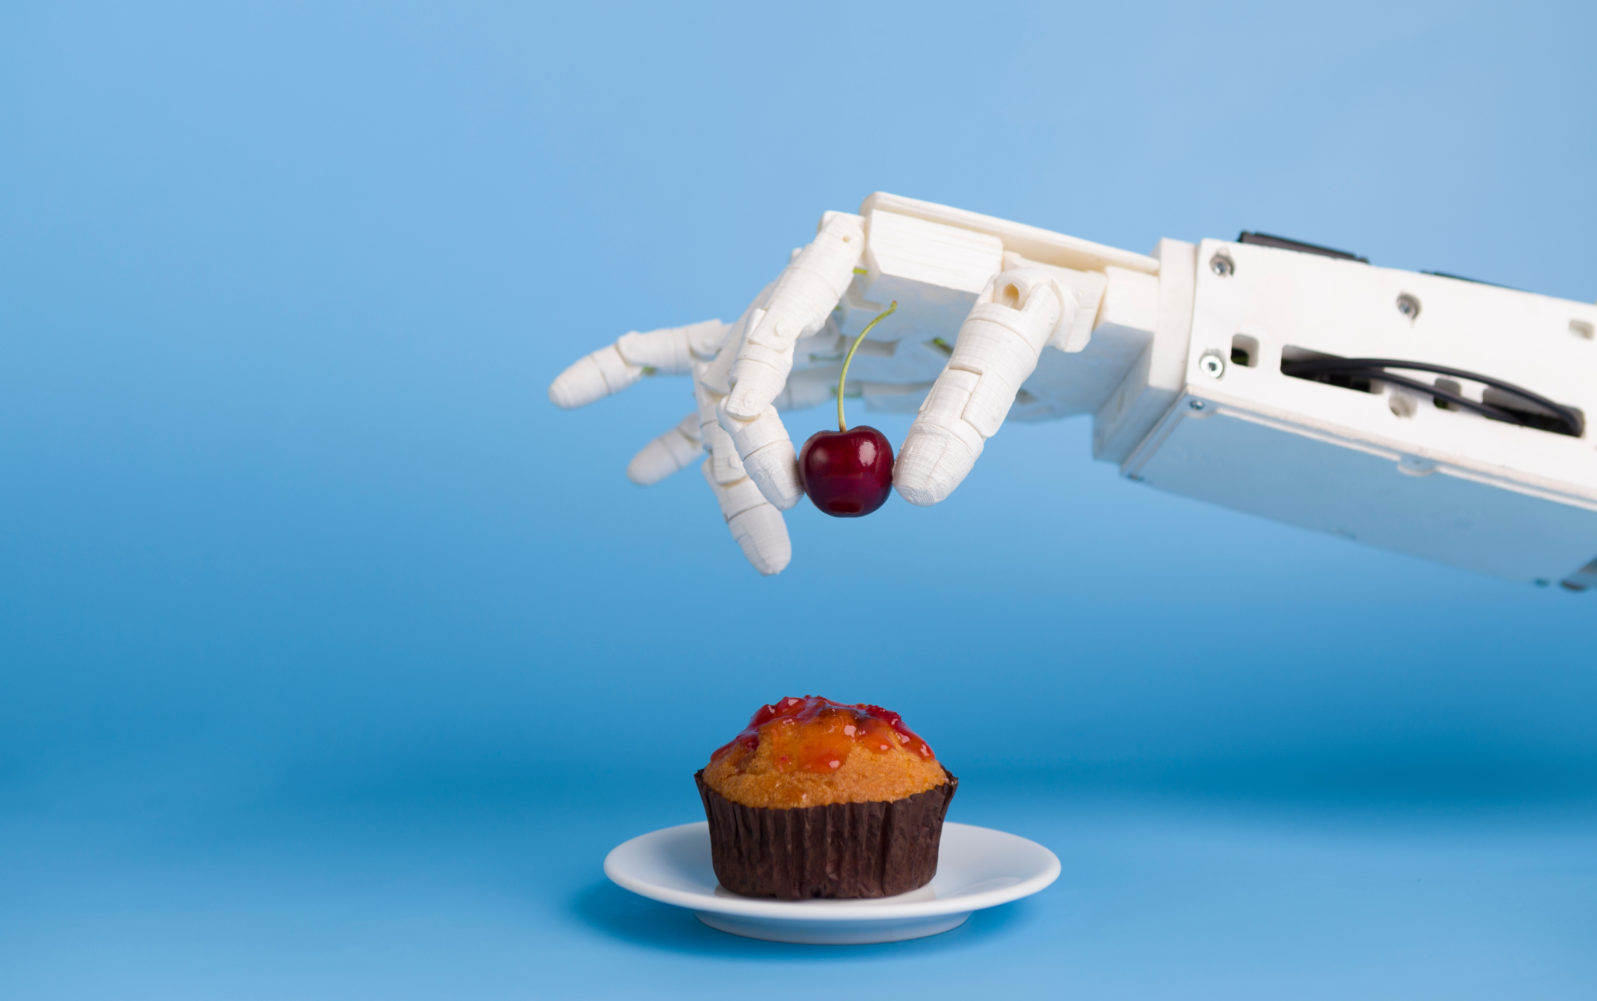 Robot hand putting fresh cherry on top of the cupcake